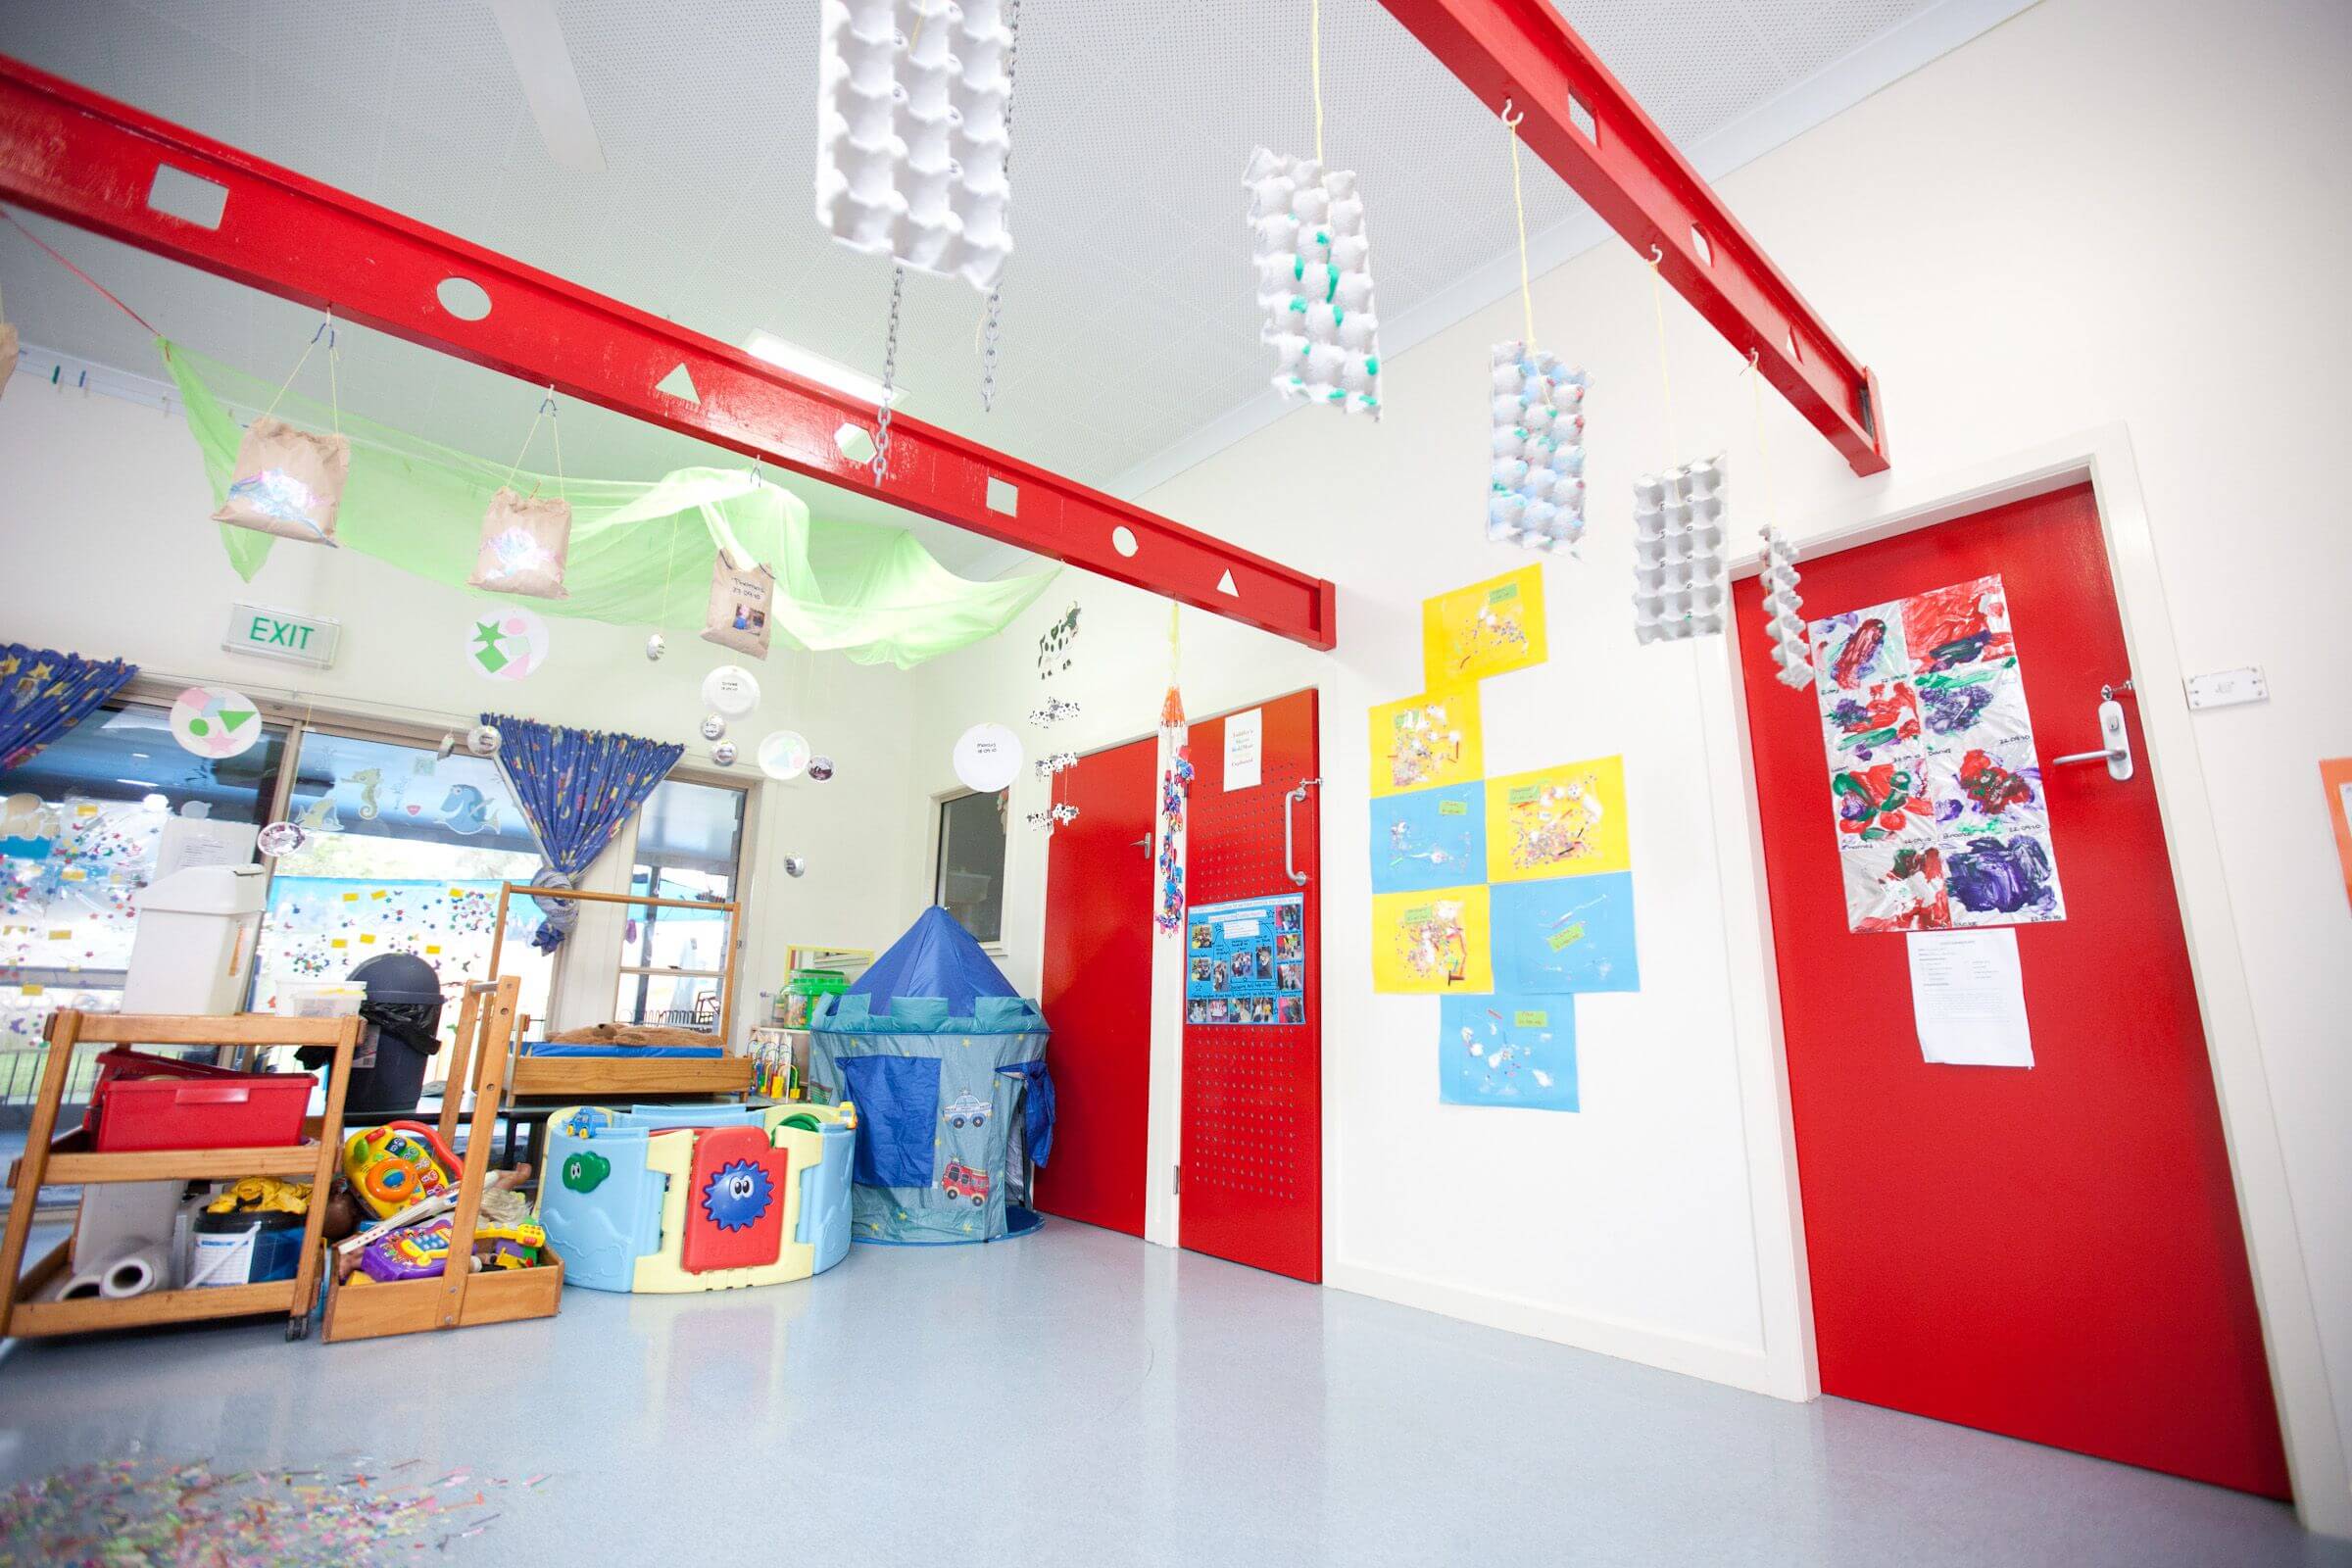 commercial painting - interior school building